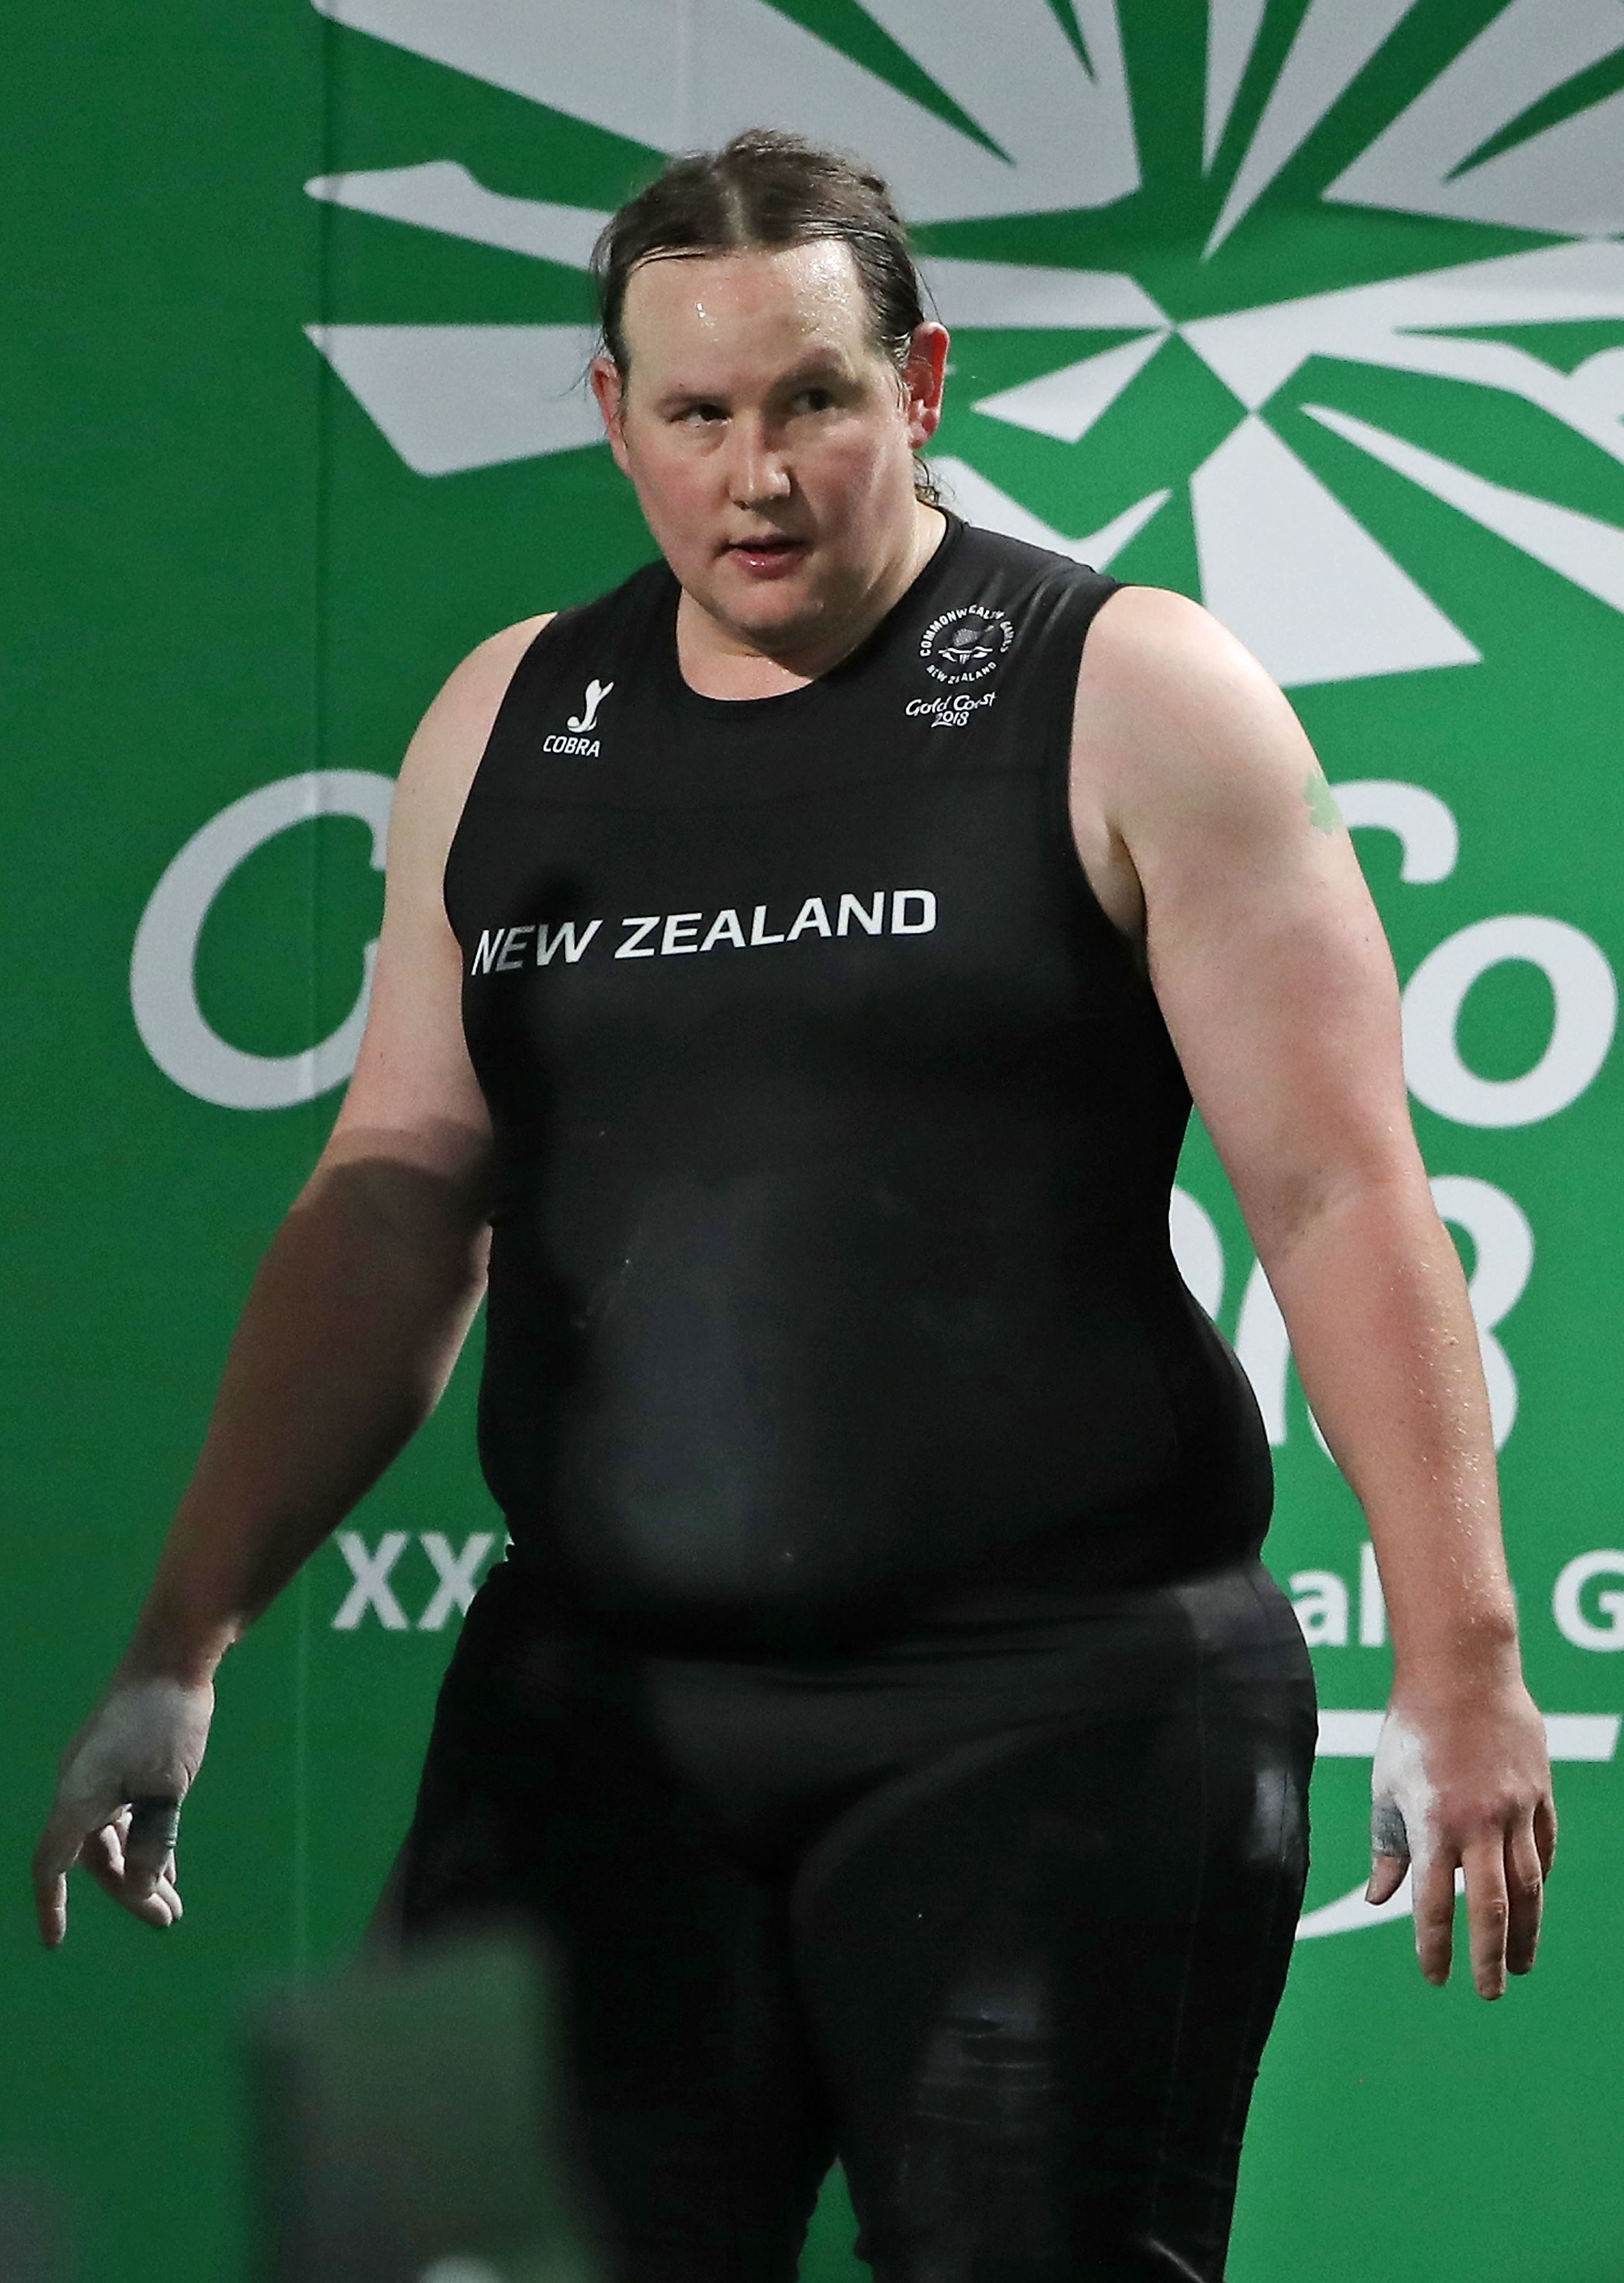 New Zealand athlete Laurel Hubbard walking on stage during the Women's +90kg Final during the Gold Coast 2018 Commonwealth Games at Carrara Sports and Leisure Centre on the Gold Coast, Australia | Photo: Scott Barbour/Getty Images